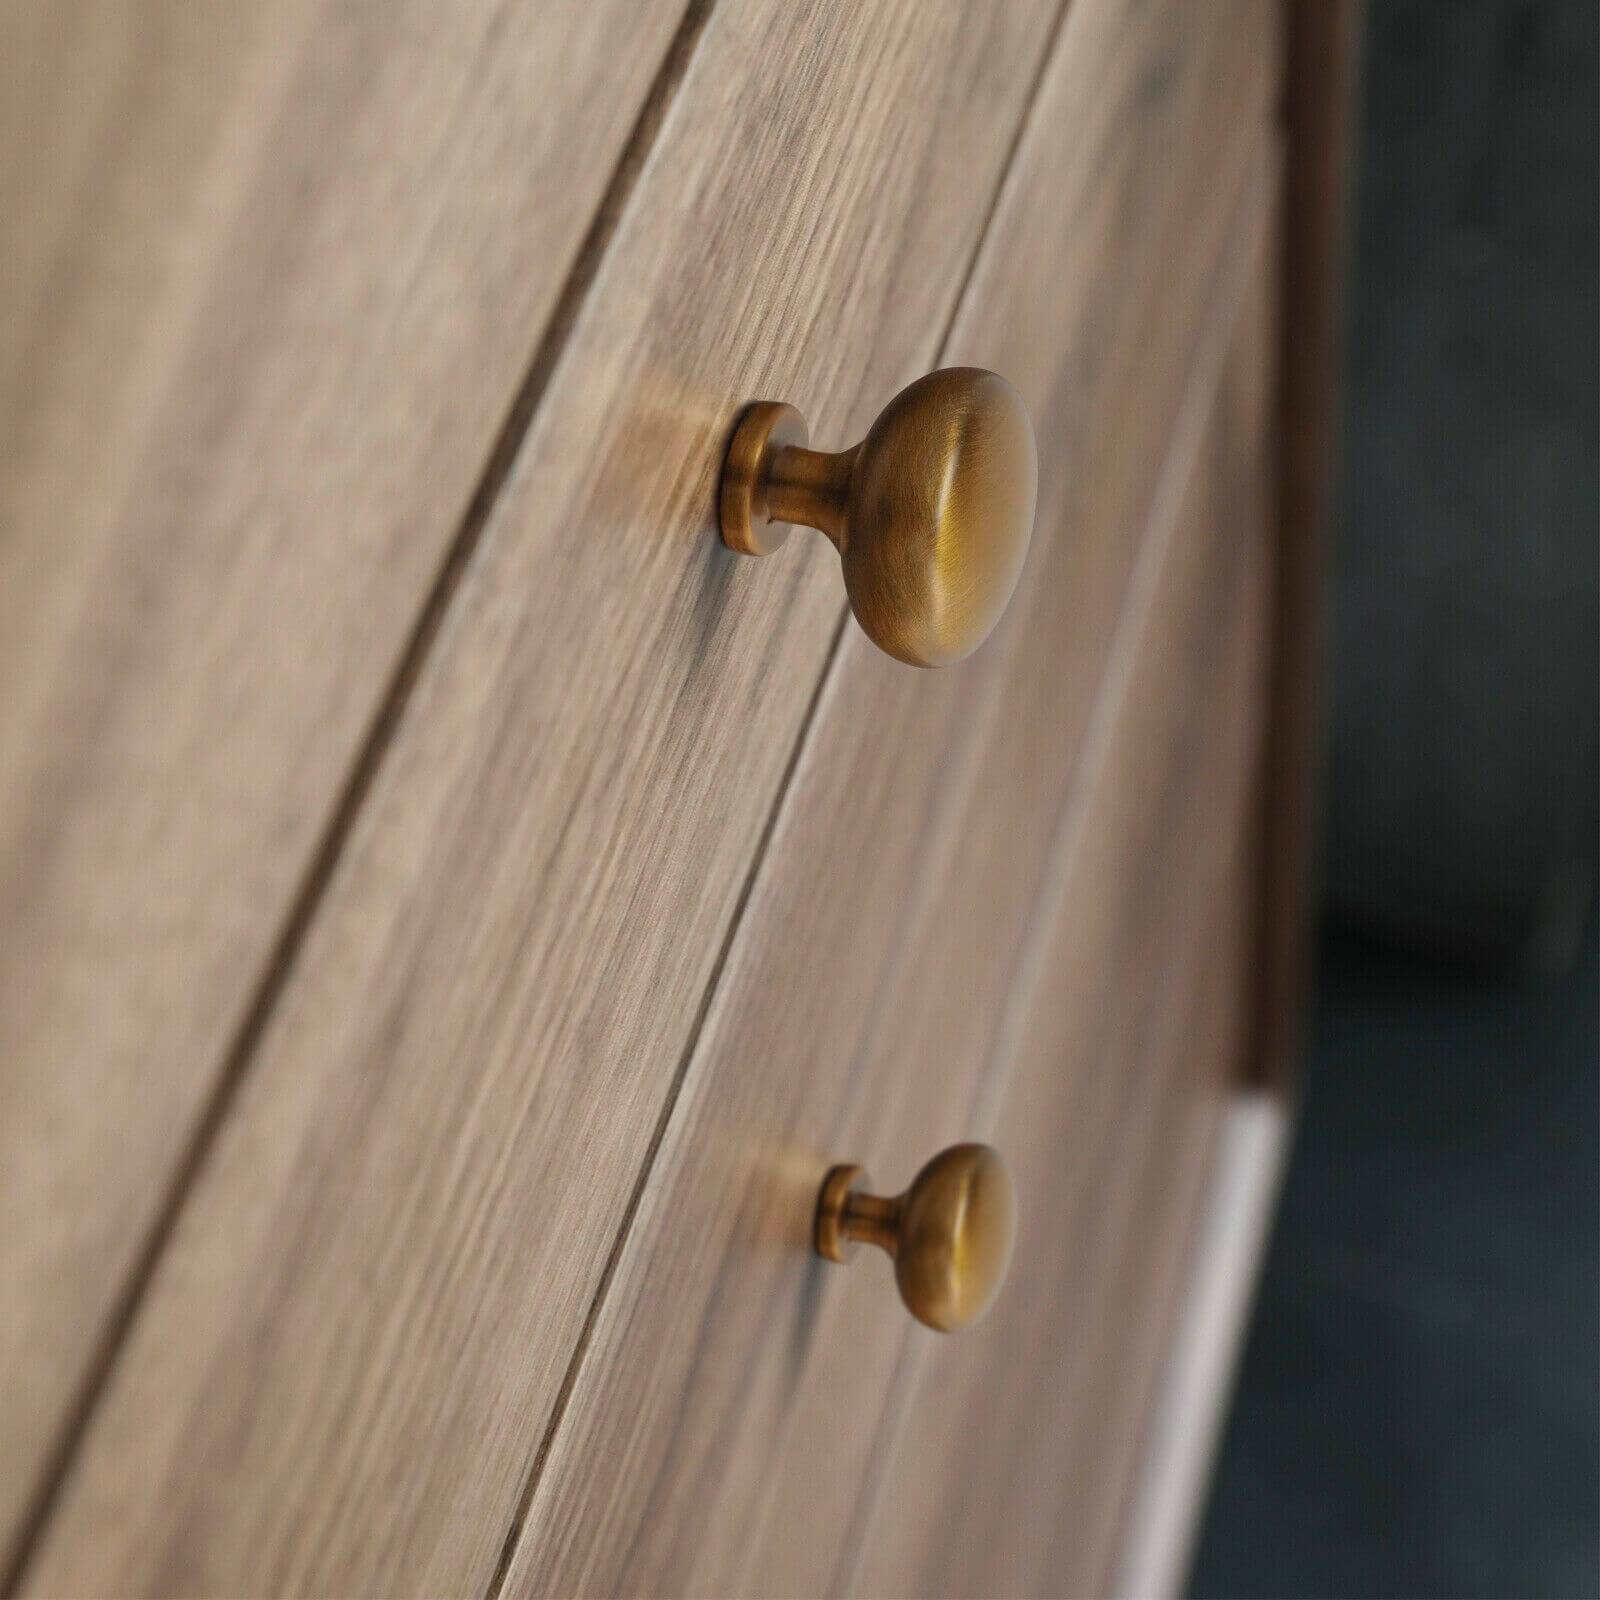 display of Cabinet Knobs Round Brushed Handles